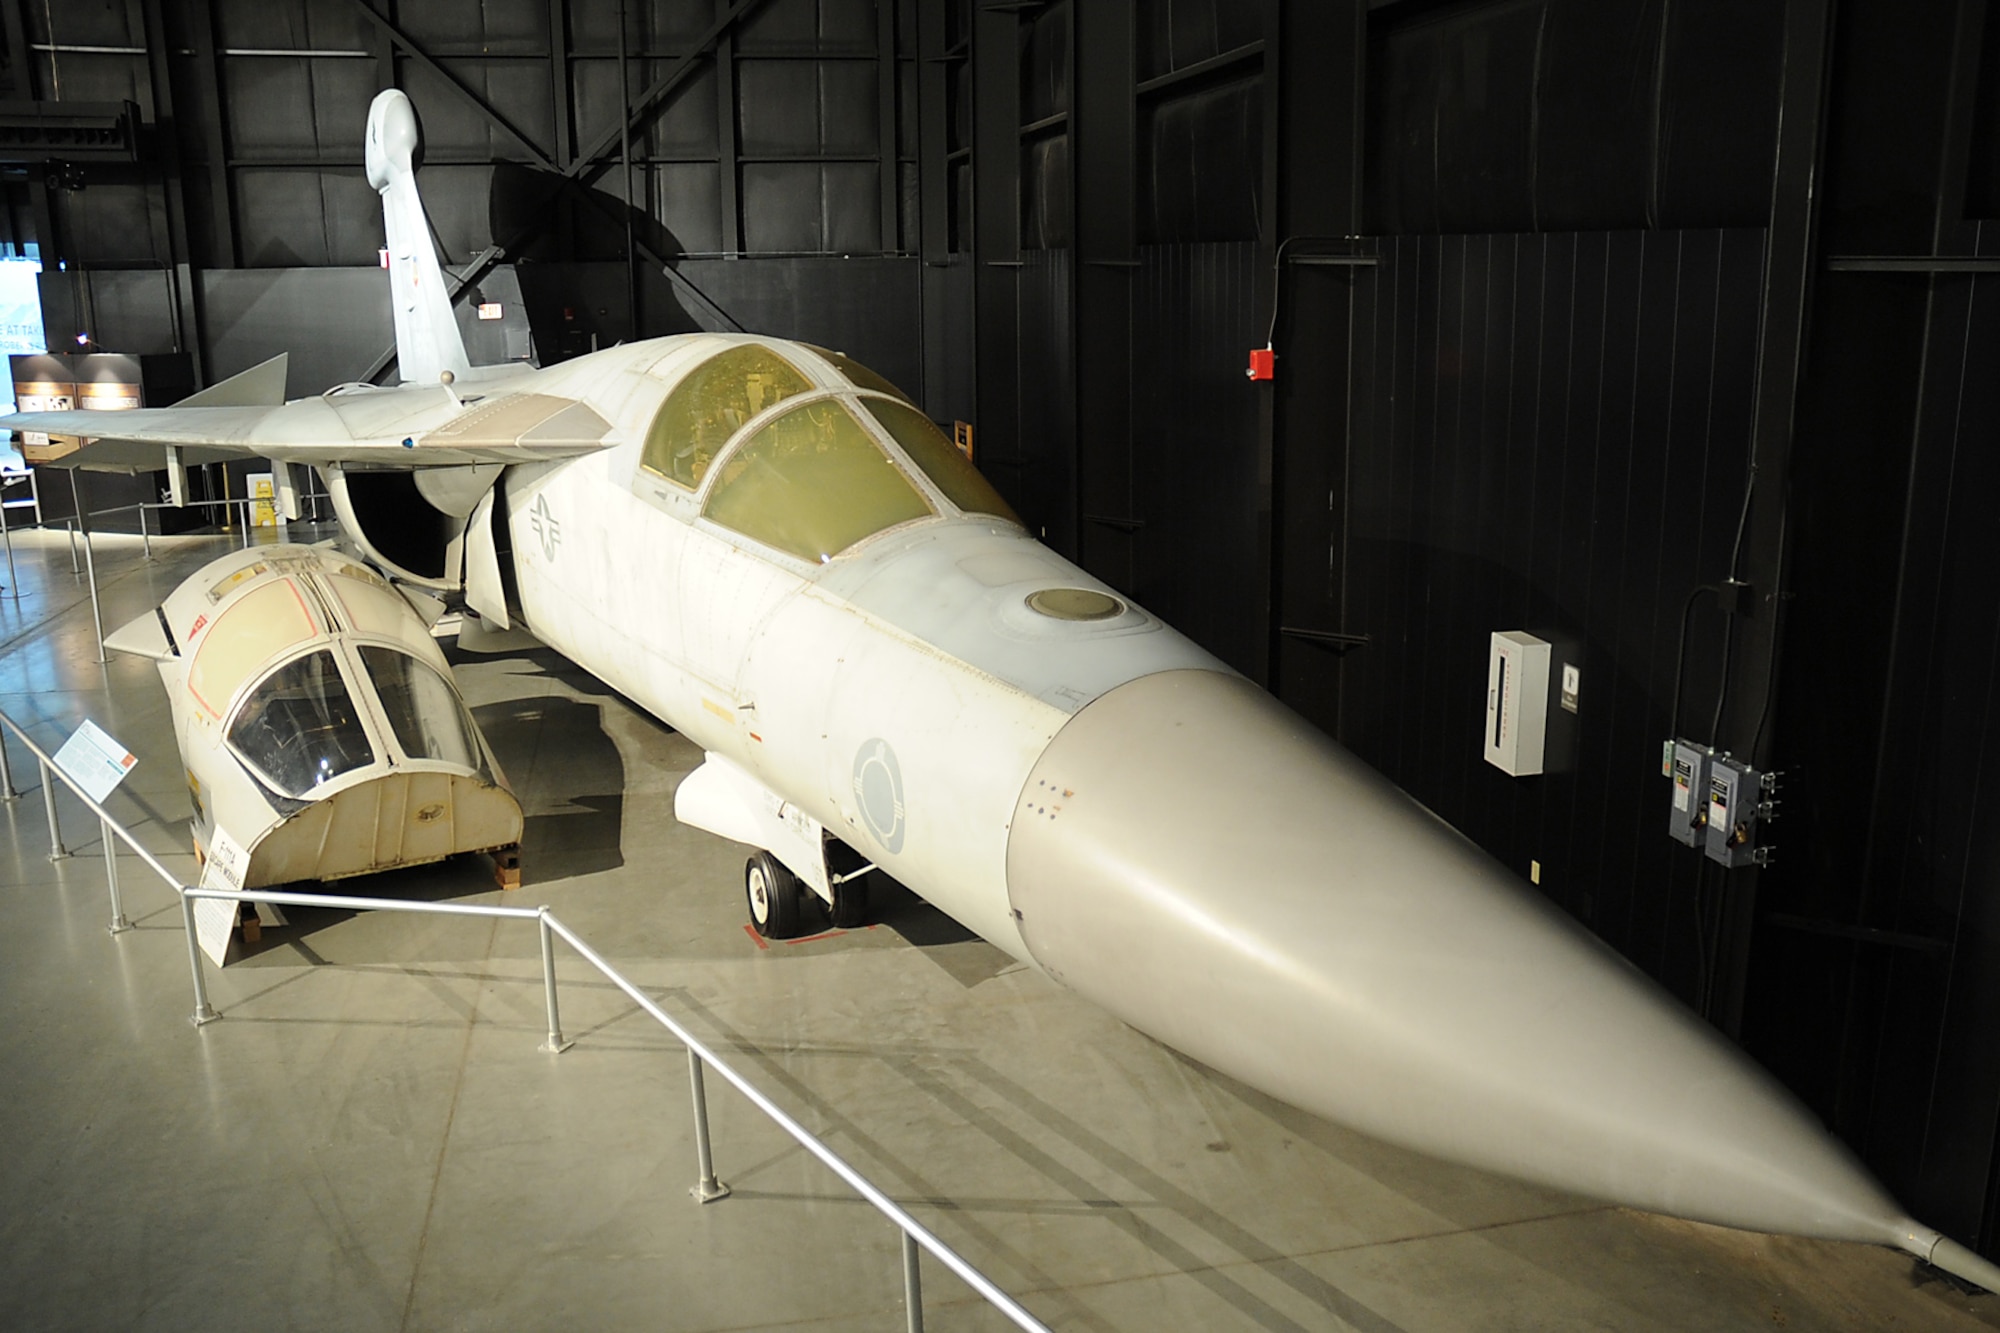 DAYTON, Ohio -- General Dynamics EF-111A Raven in the Cold War Gallery at the National Museum of the United States Air Force. (U.S. Air Force photo)
